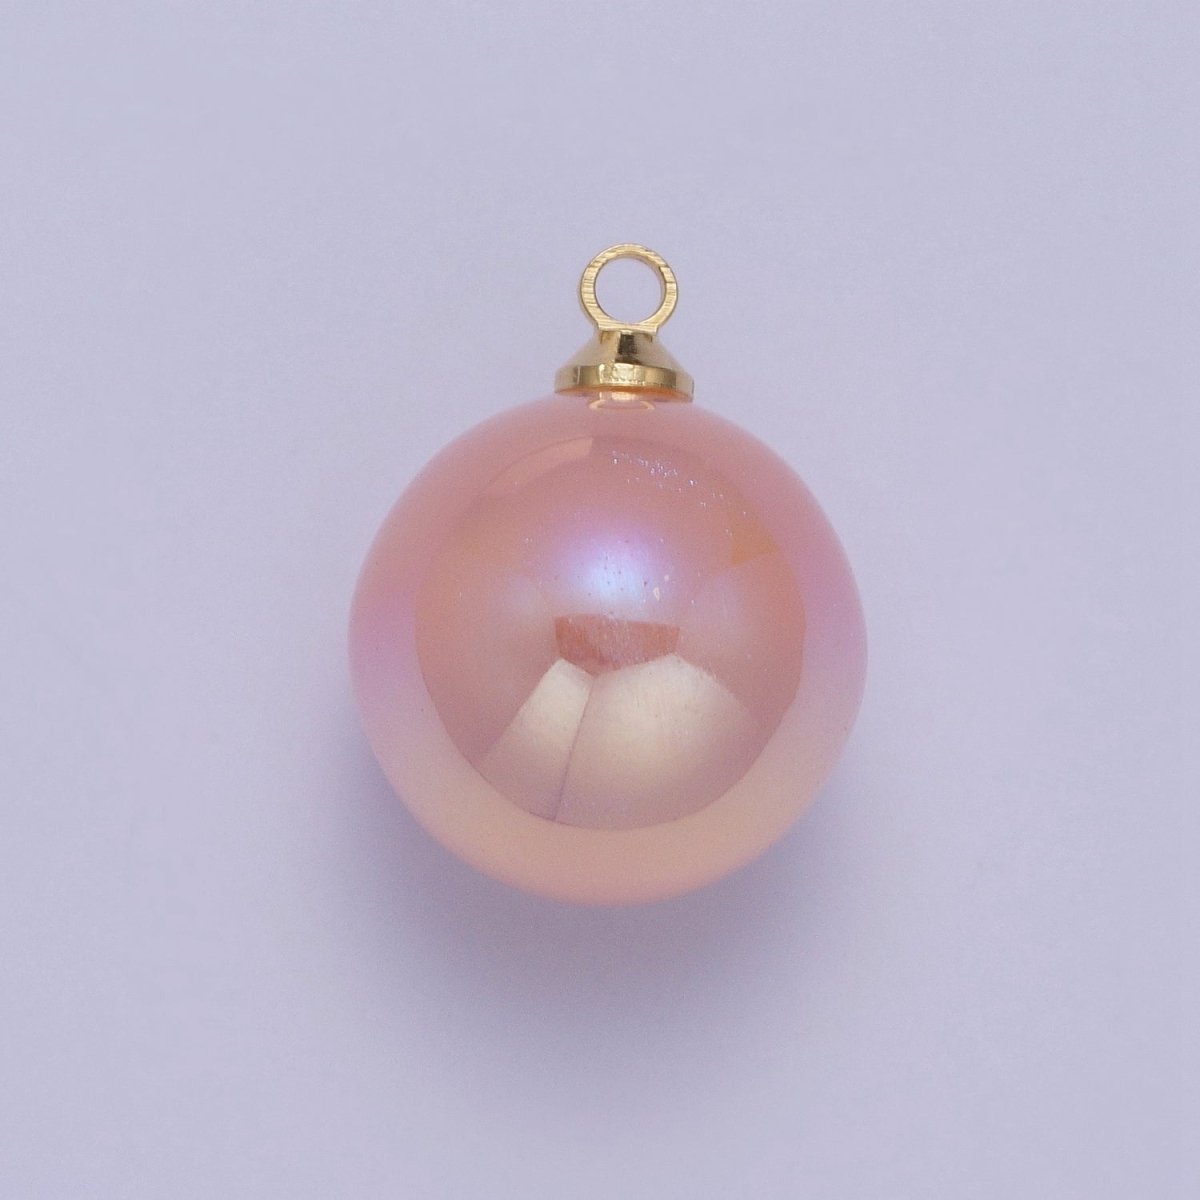 Iridescent Sparkly Pink Pearl Round Charm Pendant For Jewelry Making P1562 - DLUXCA